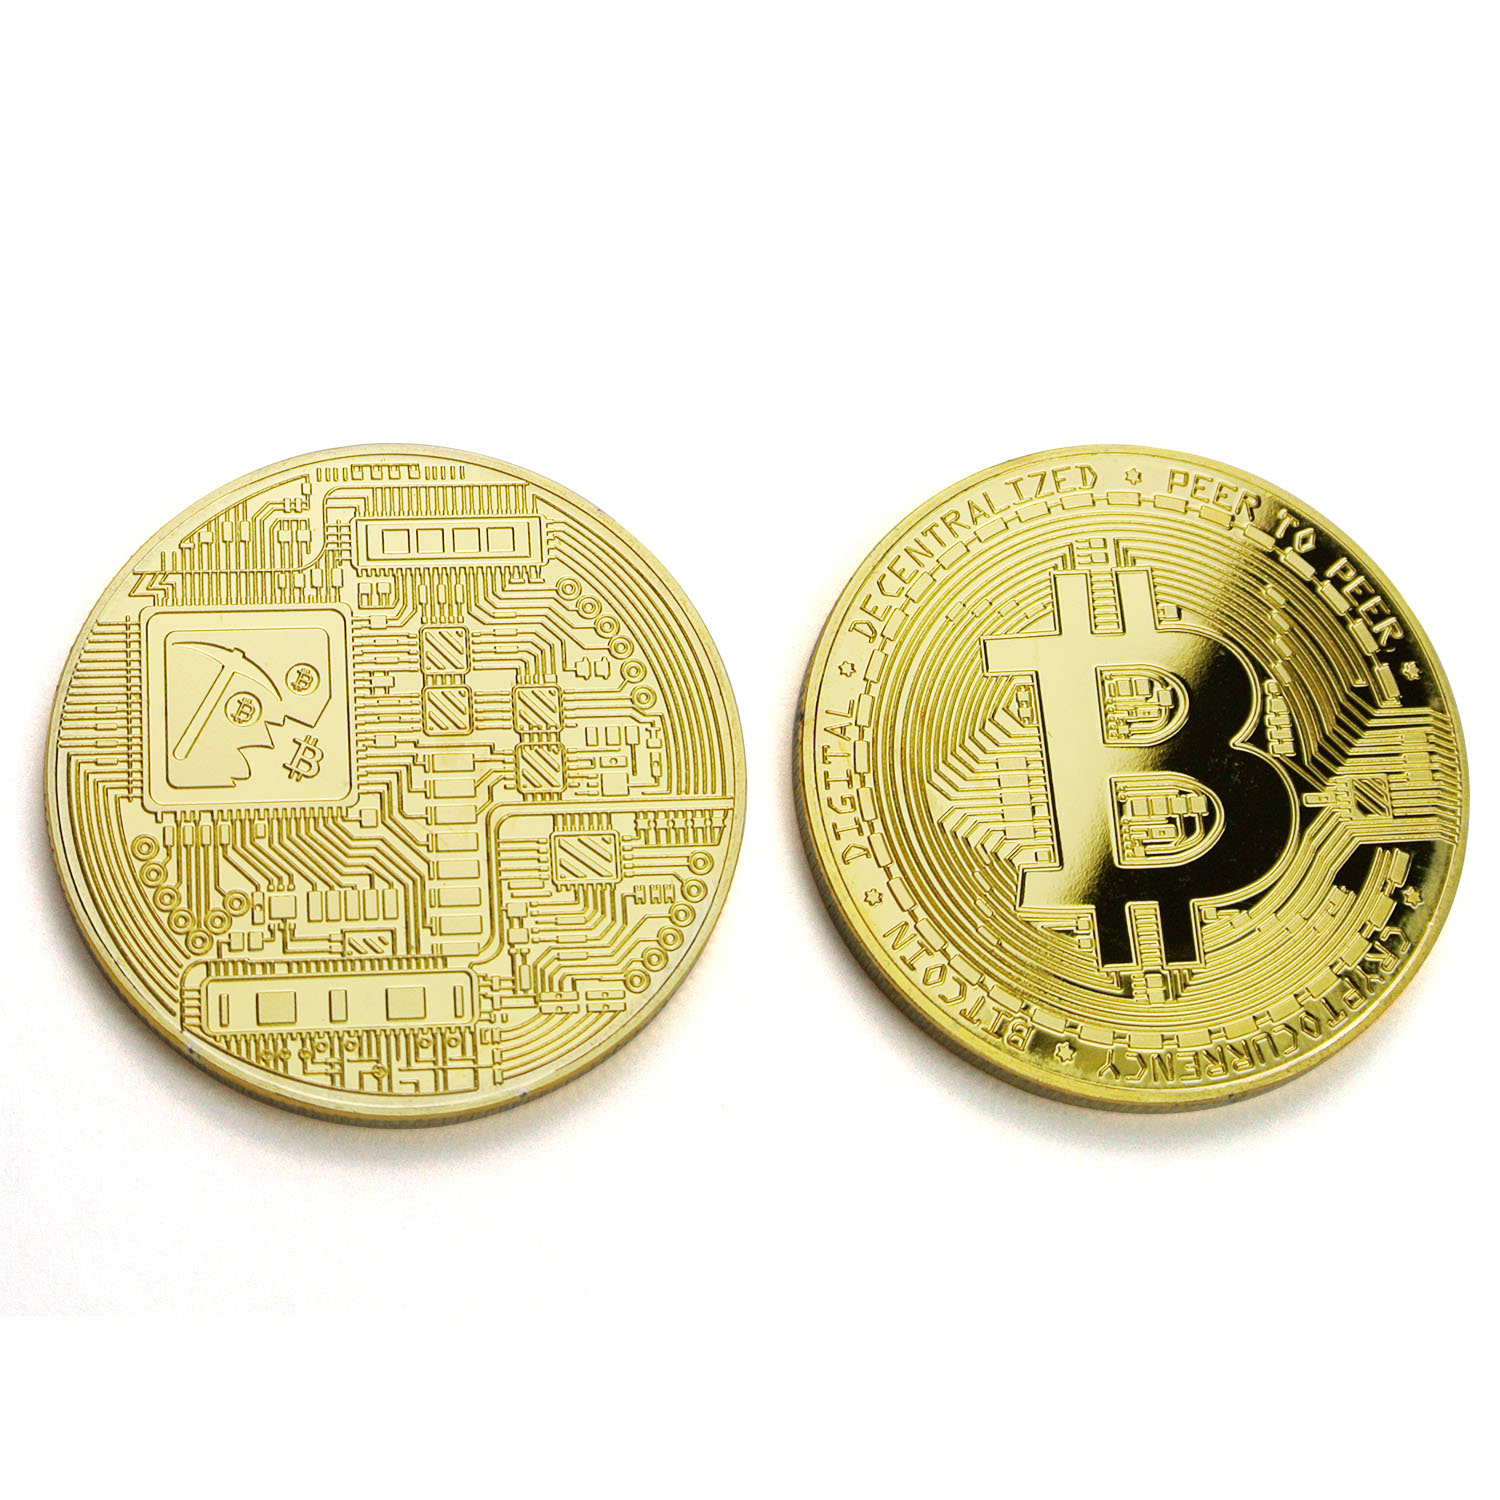 Hot sale Metal gold silver plated bit coin art collection gift copper 3d Litecoin bitcoin coin